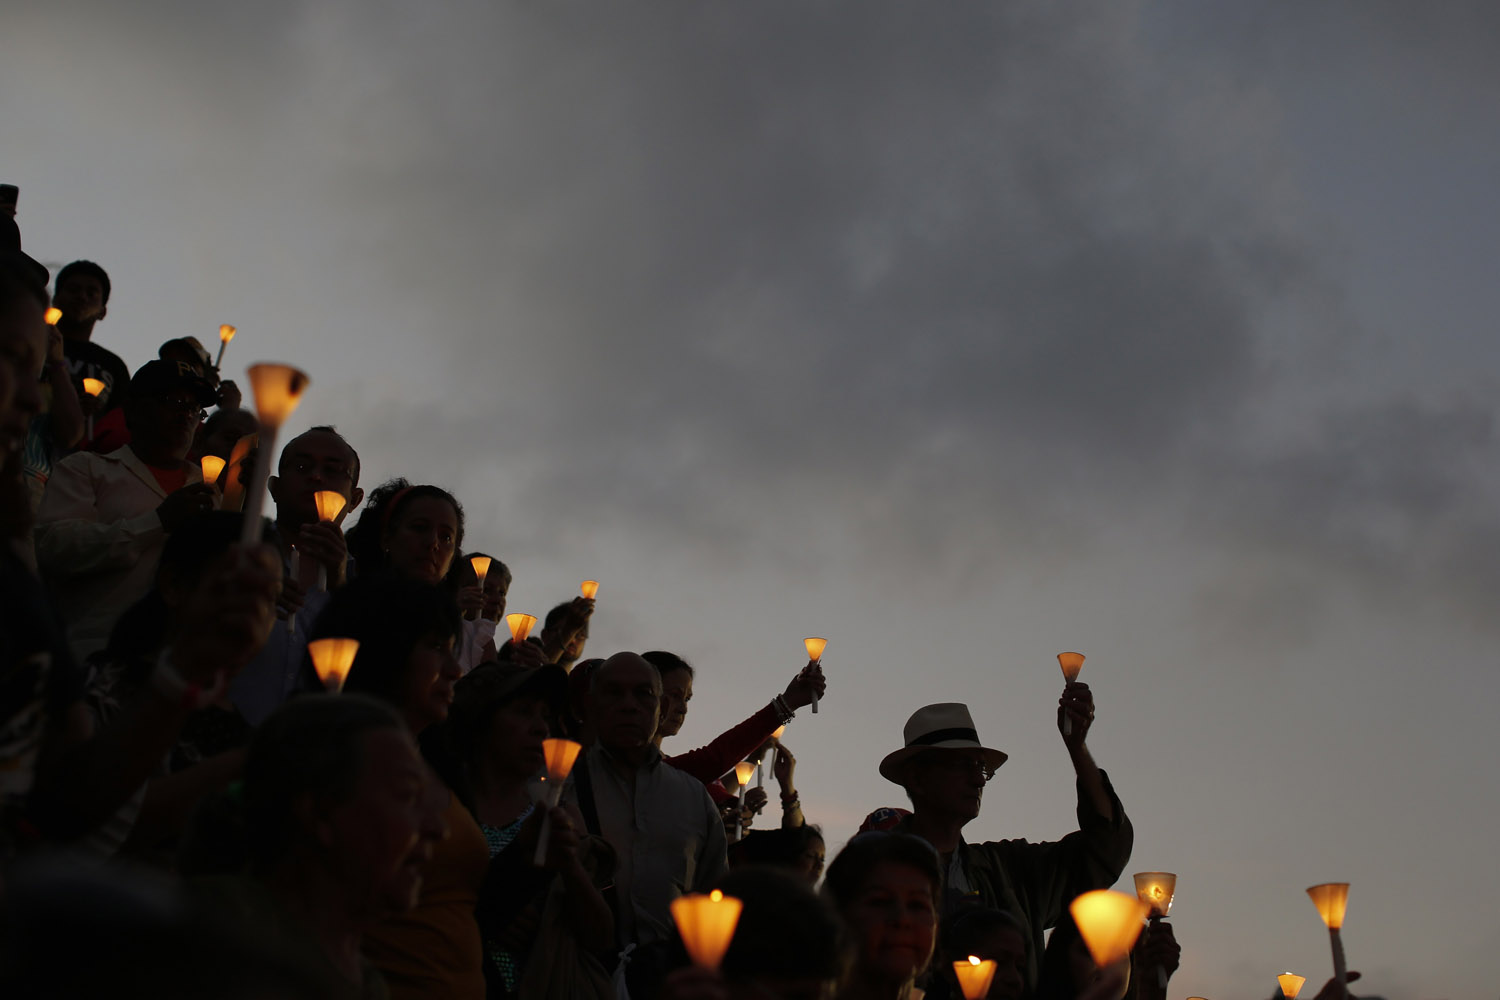 Feb. 22, 2013. People hold candles during a praying ceremony for the health of Venezuelan President Hugo Chavez, in Caracas, Venezuela.